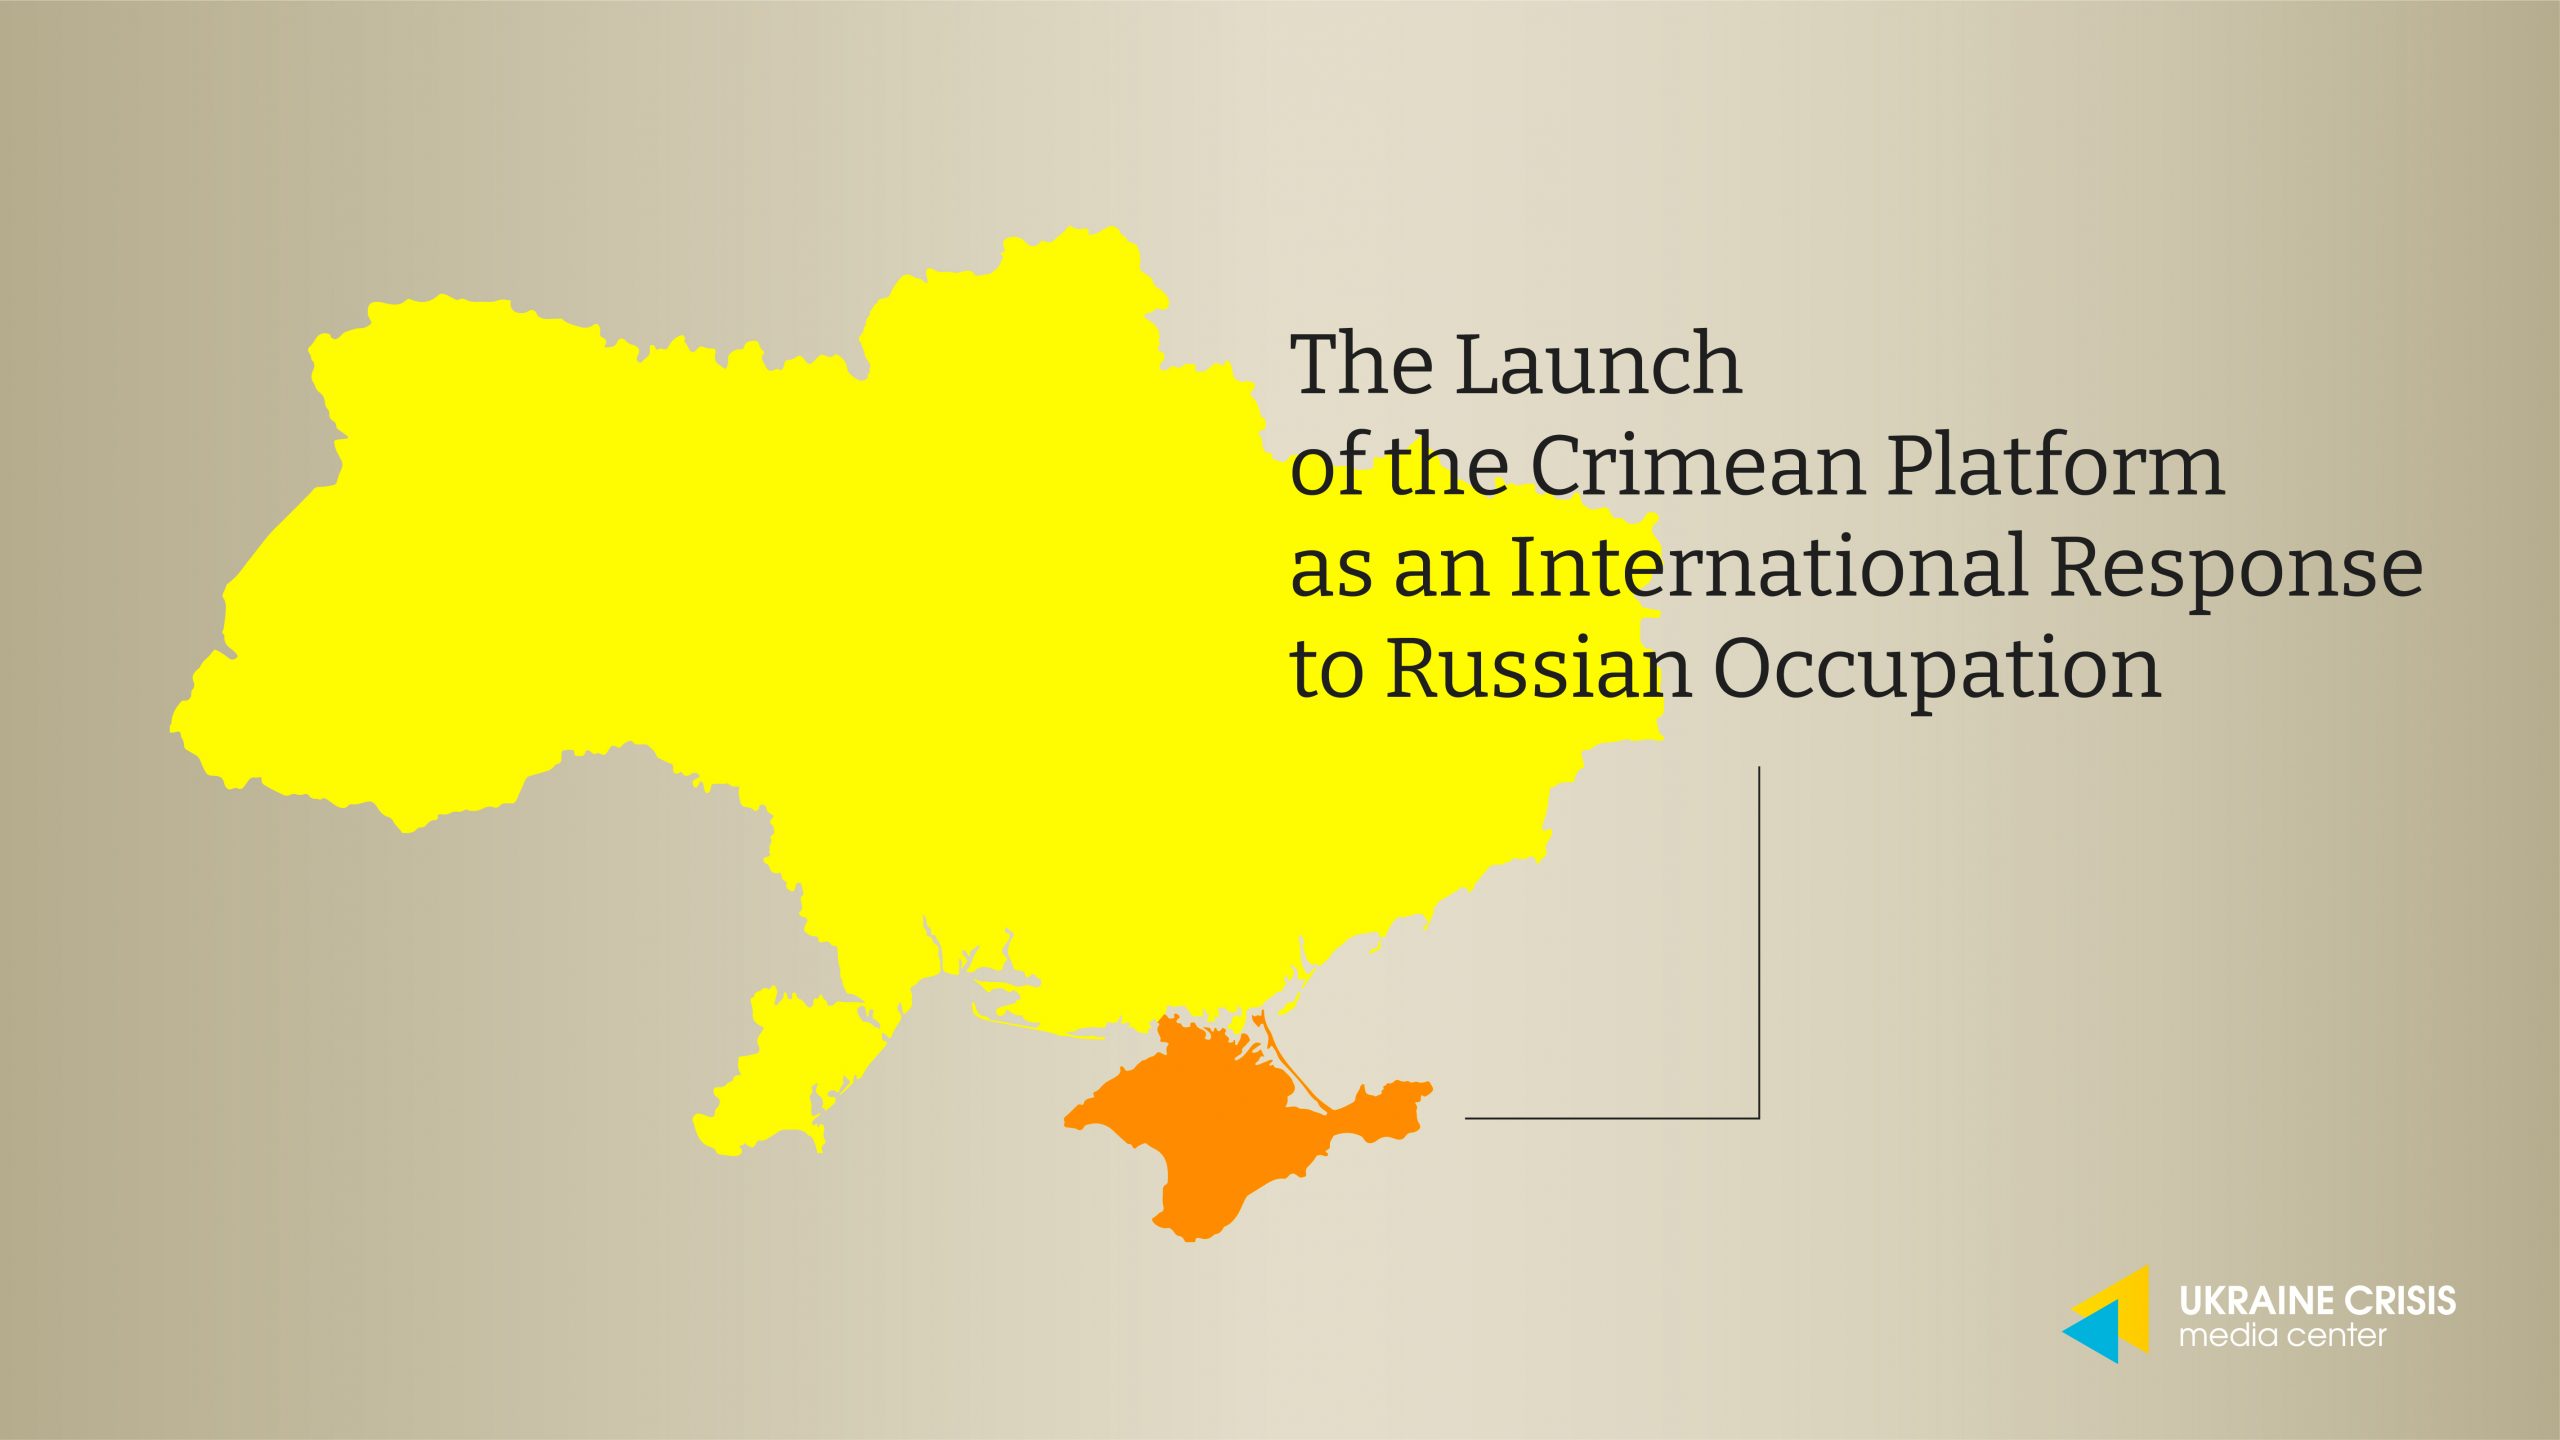 The Launch of the Crimean Platform as an International Response to Russian Occupation